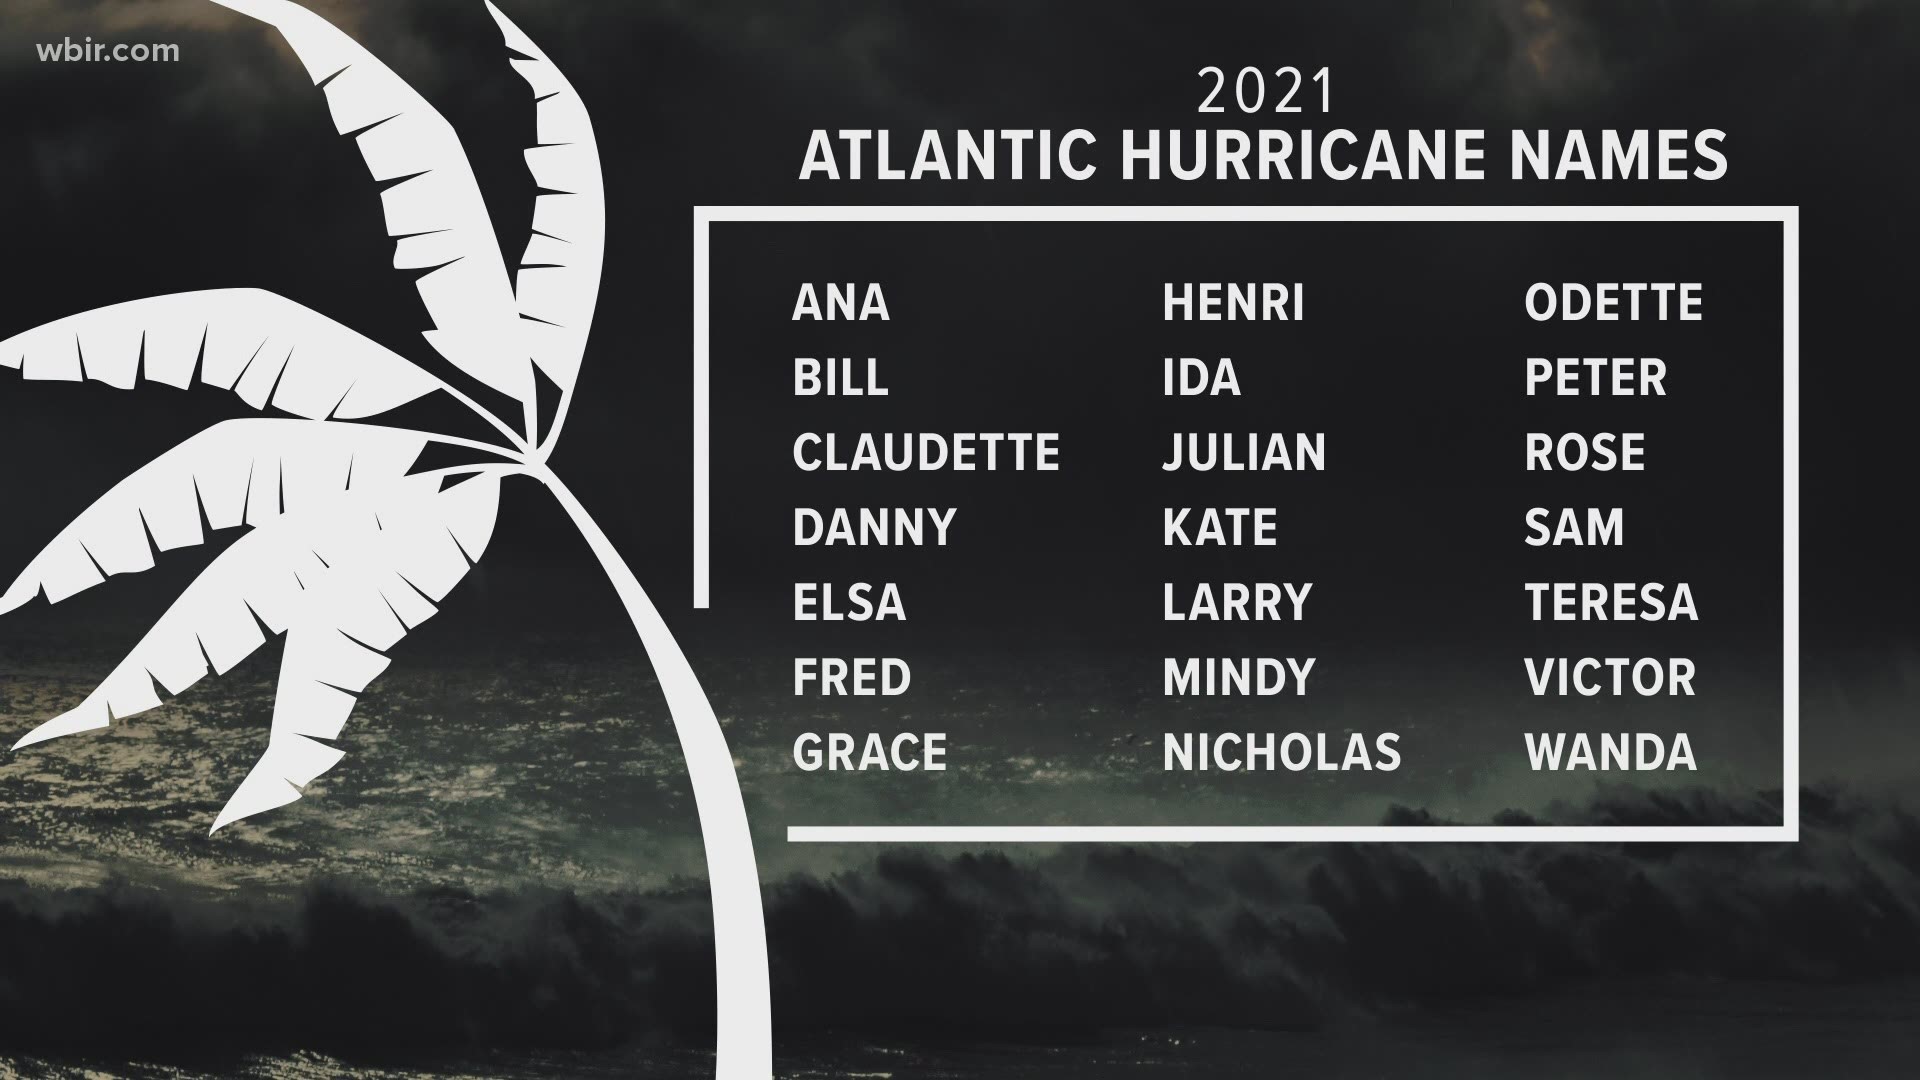 Meteorologist Cassie Nall breaks down everything you need to know heading into the 2021 hurricane season.